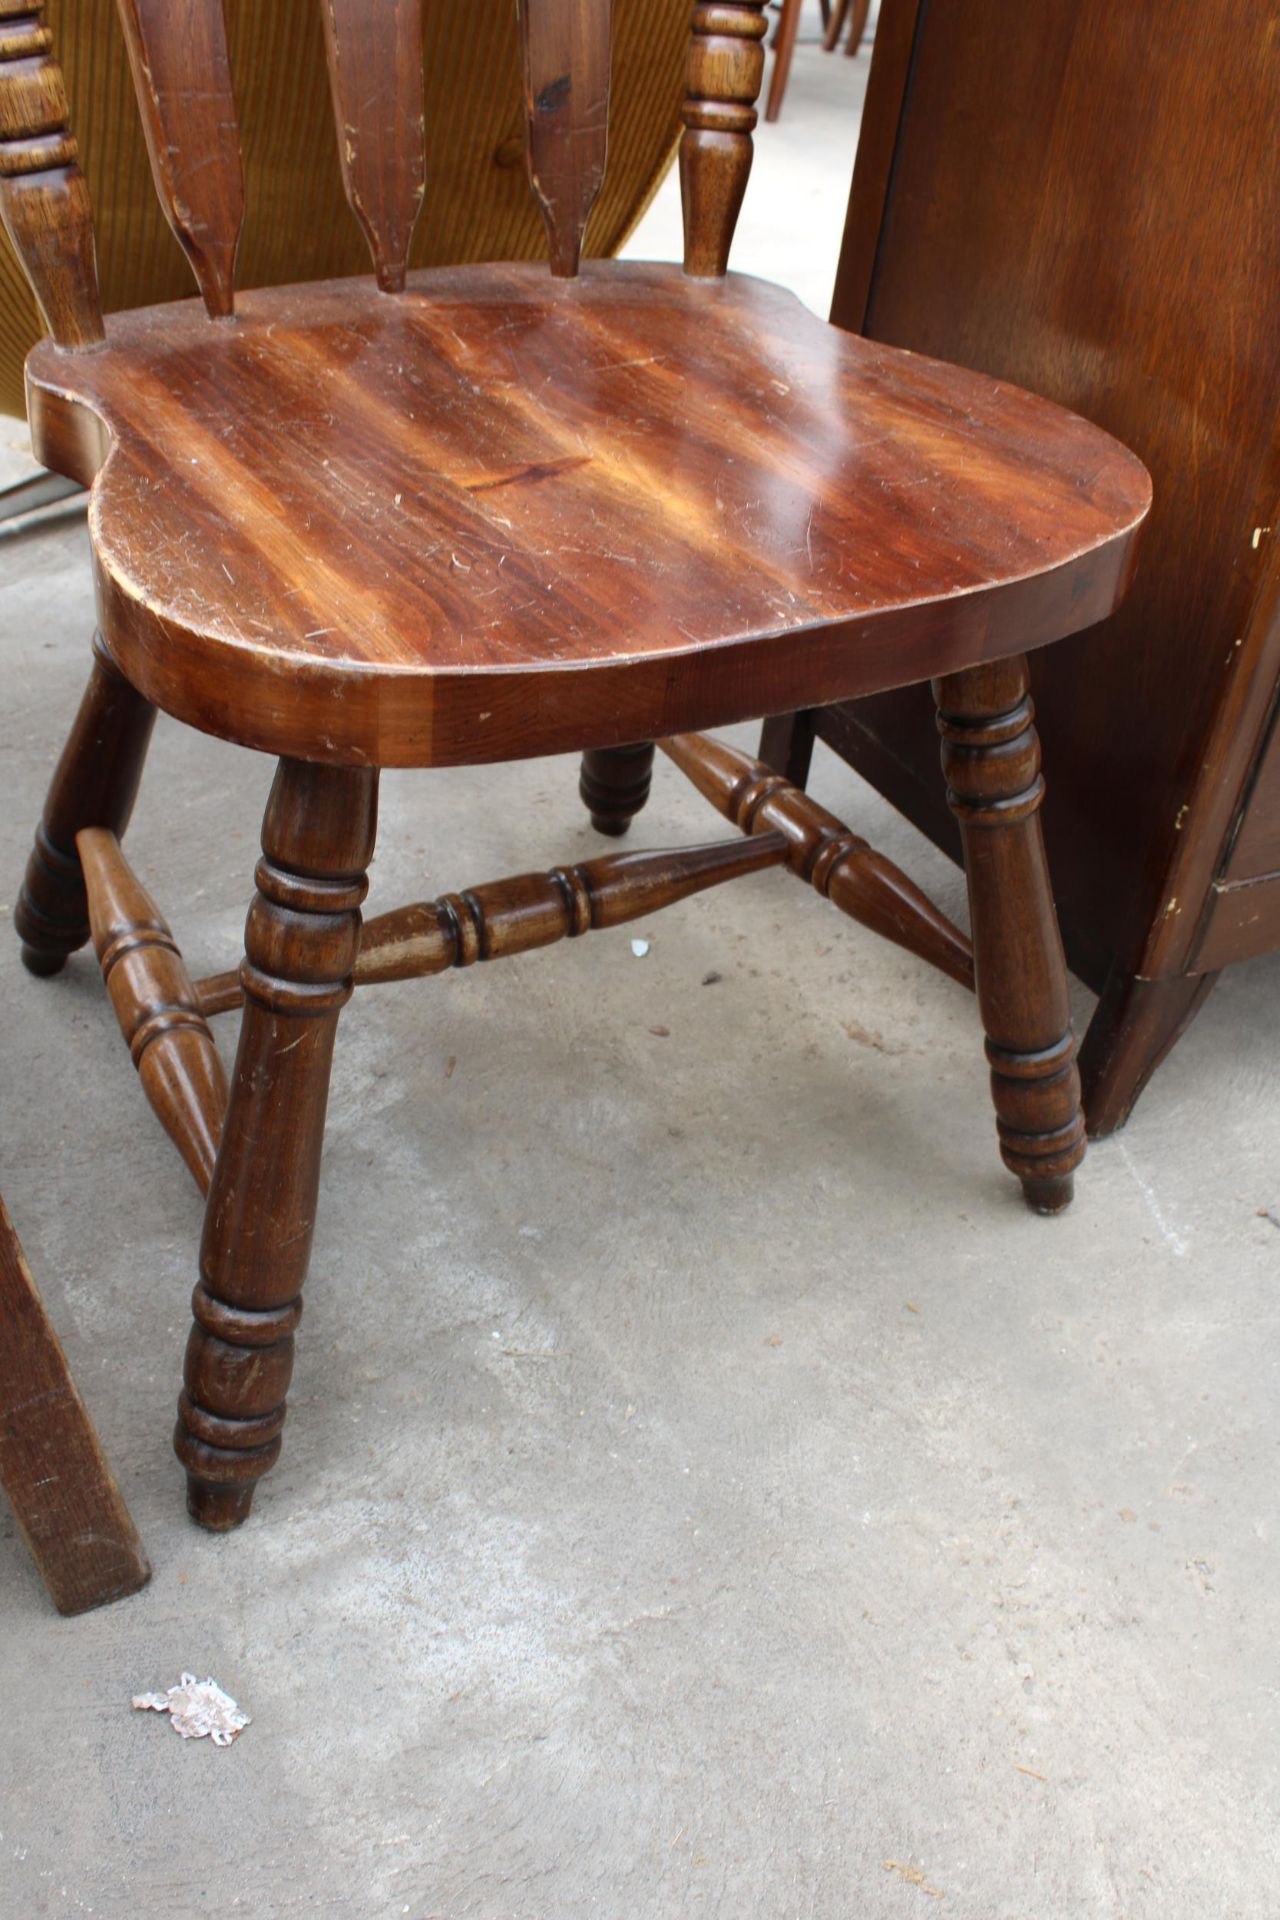 A MID TWENTIETH CENTURY OAK LADDER BACK CHAIR AND HARDWOOD KITCHEN CHAIR - Image 3 of 3